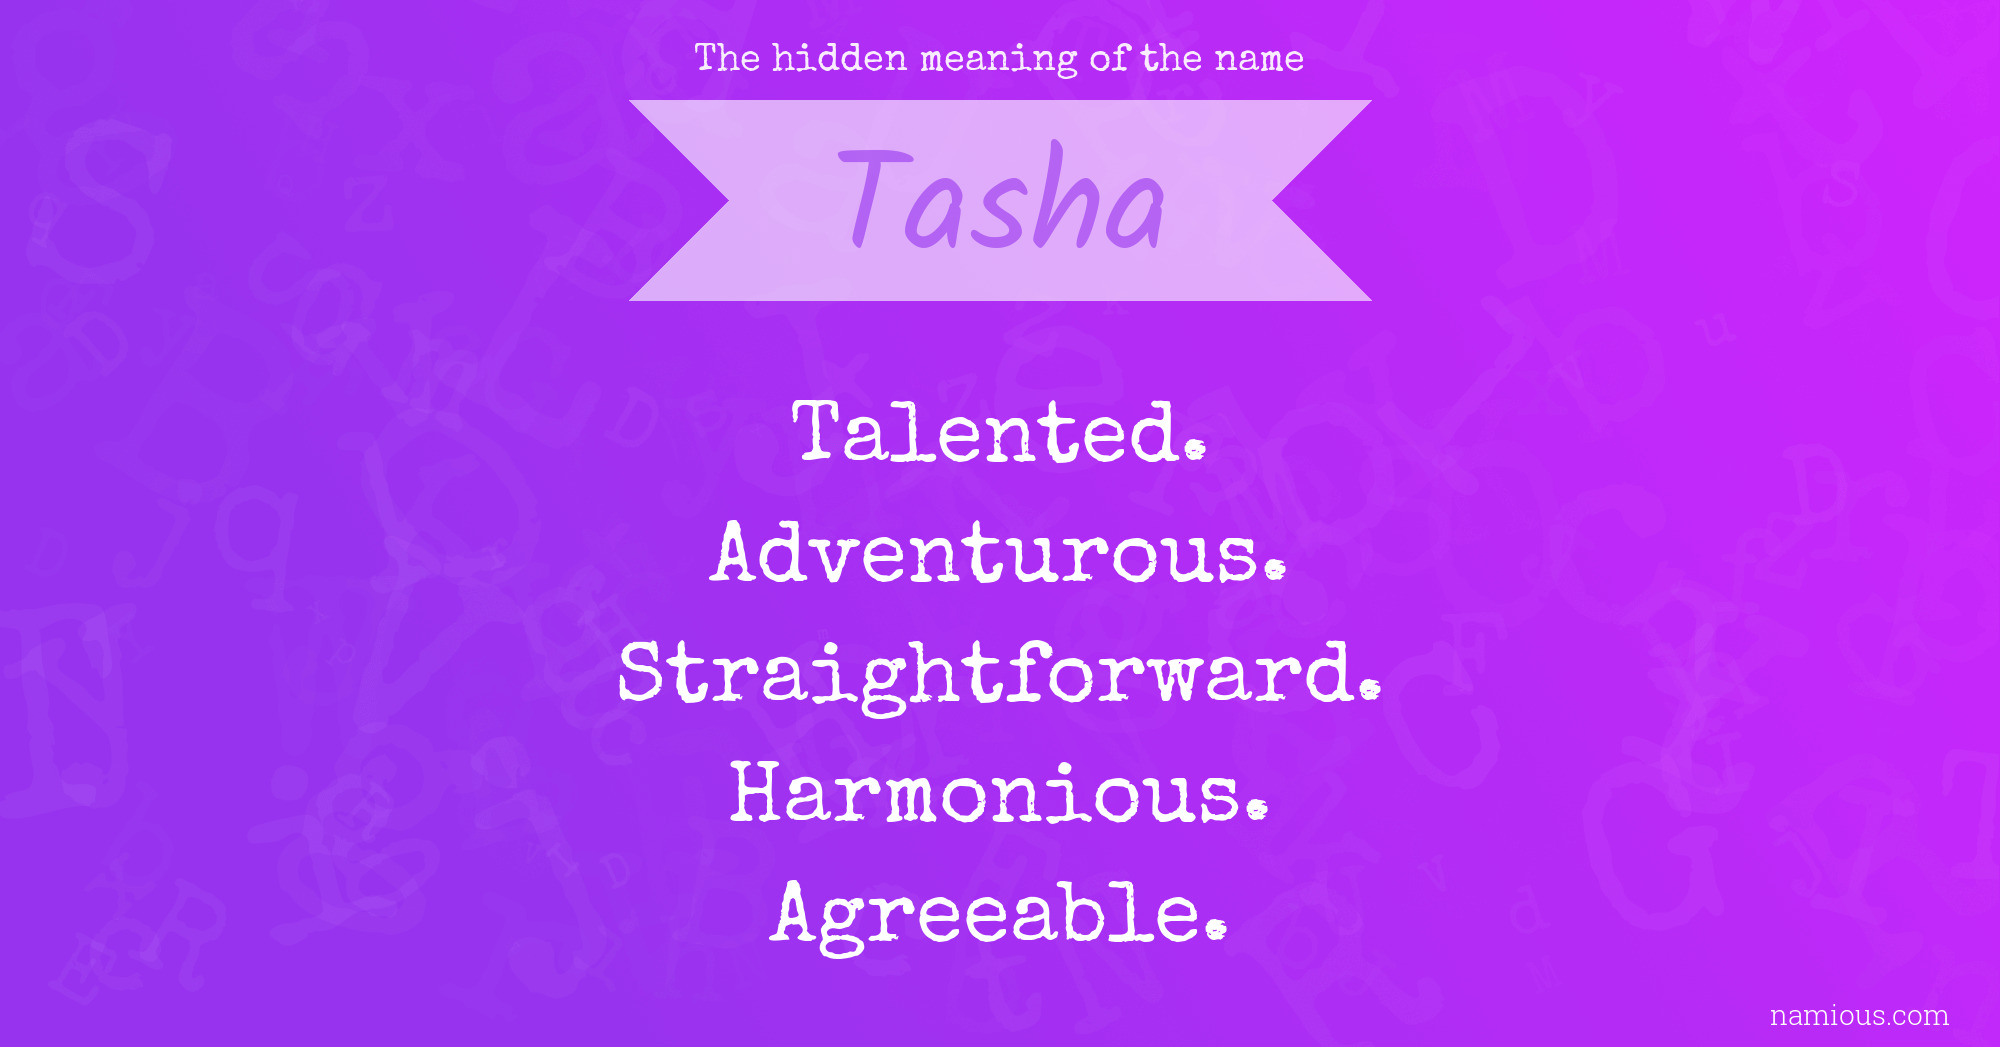 The hidden meaning of the name Tasha